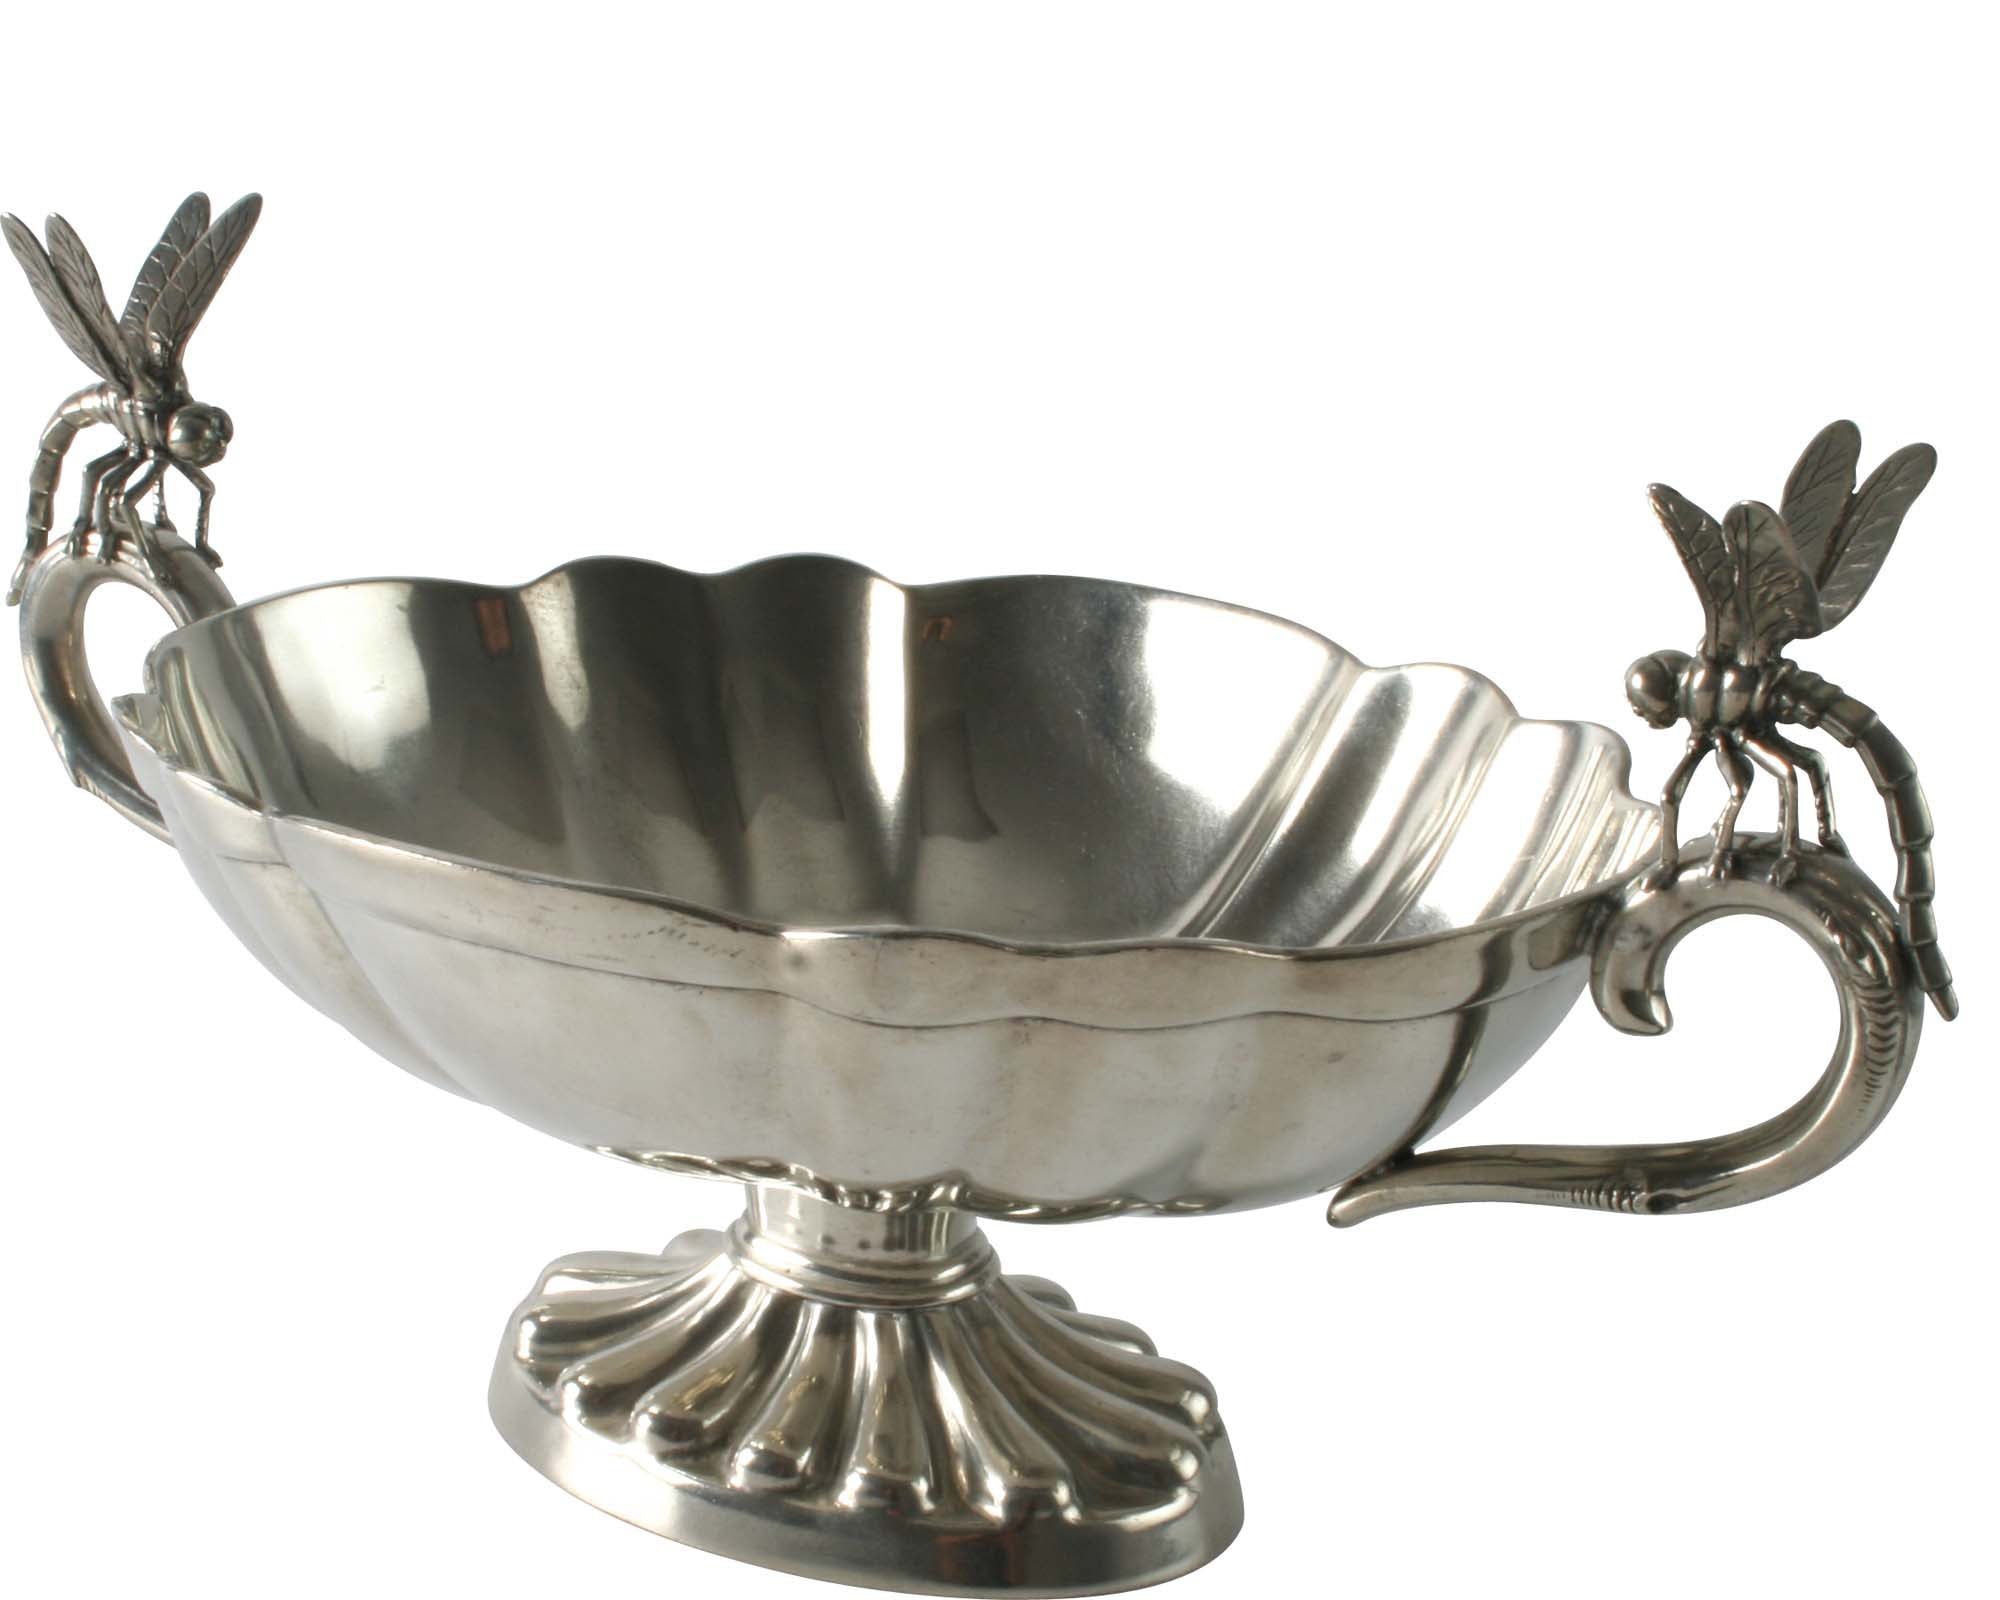 Vagabond House Dragonfly Centerpiece Product Image